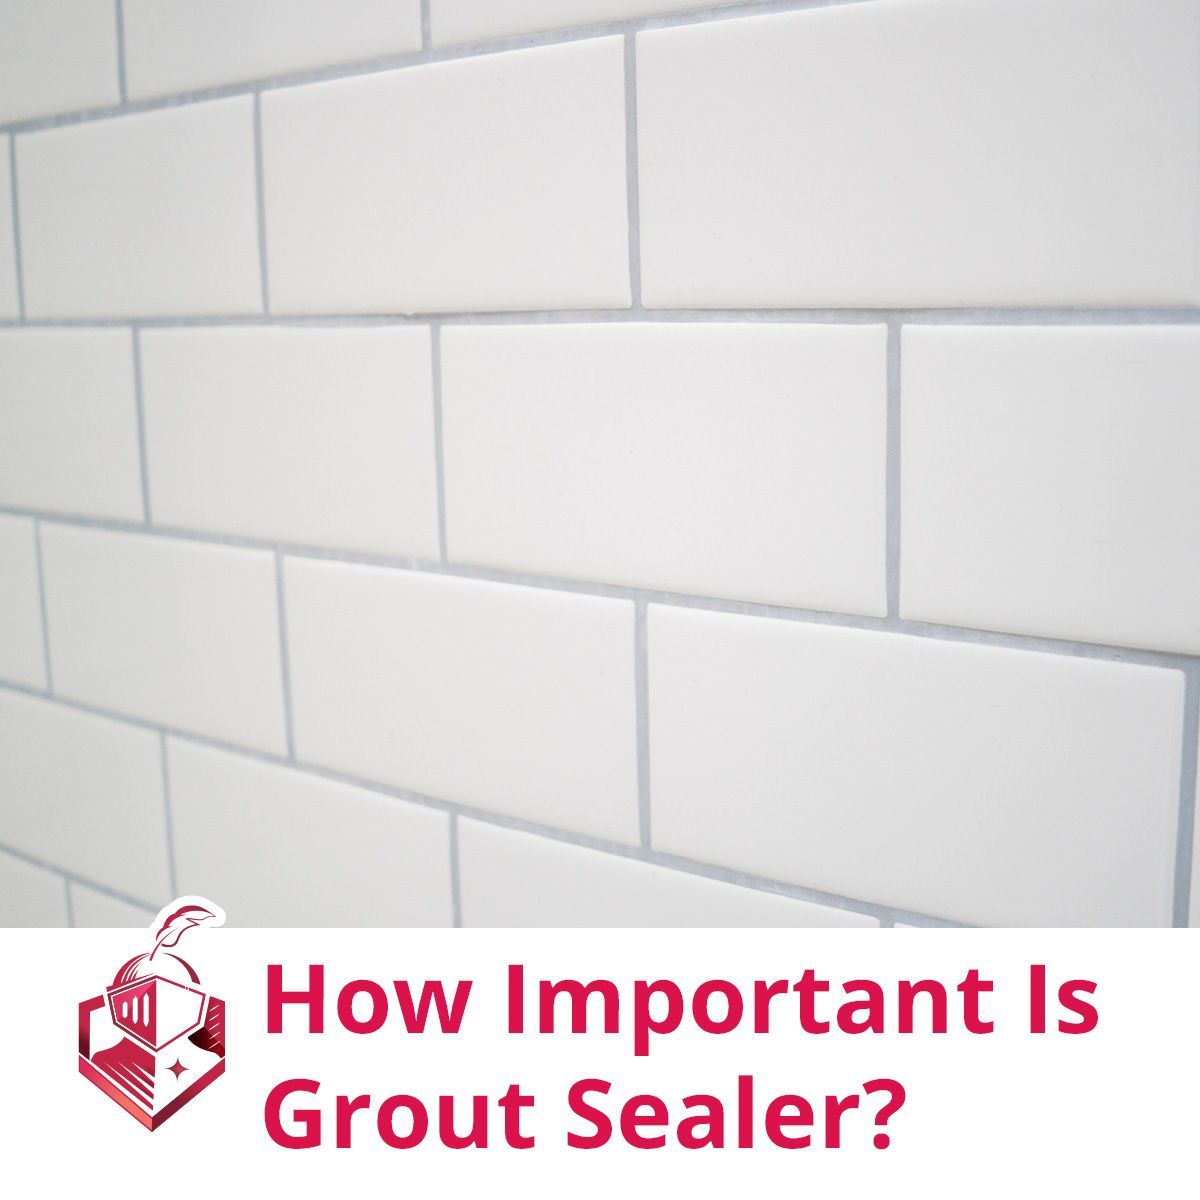 How Important Is Grout Sealer?